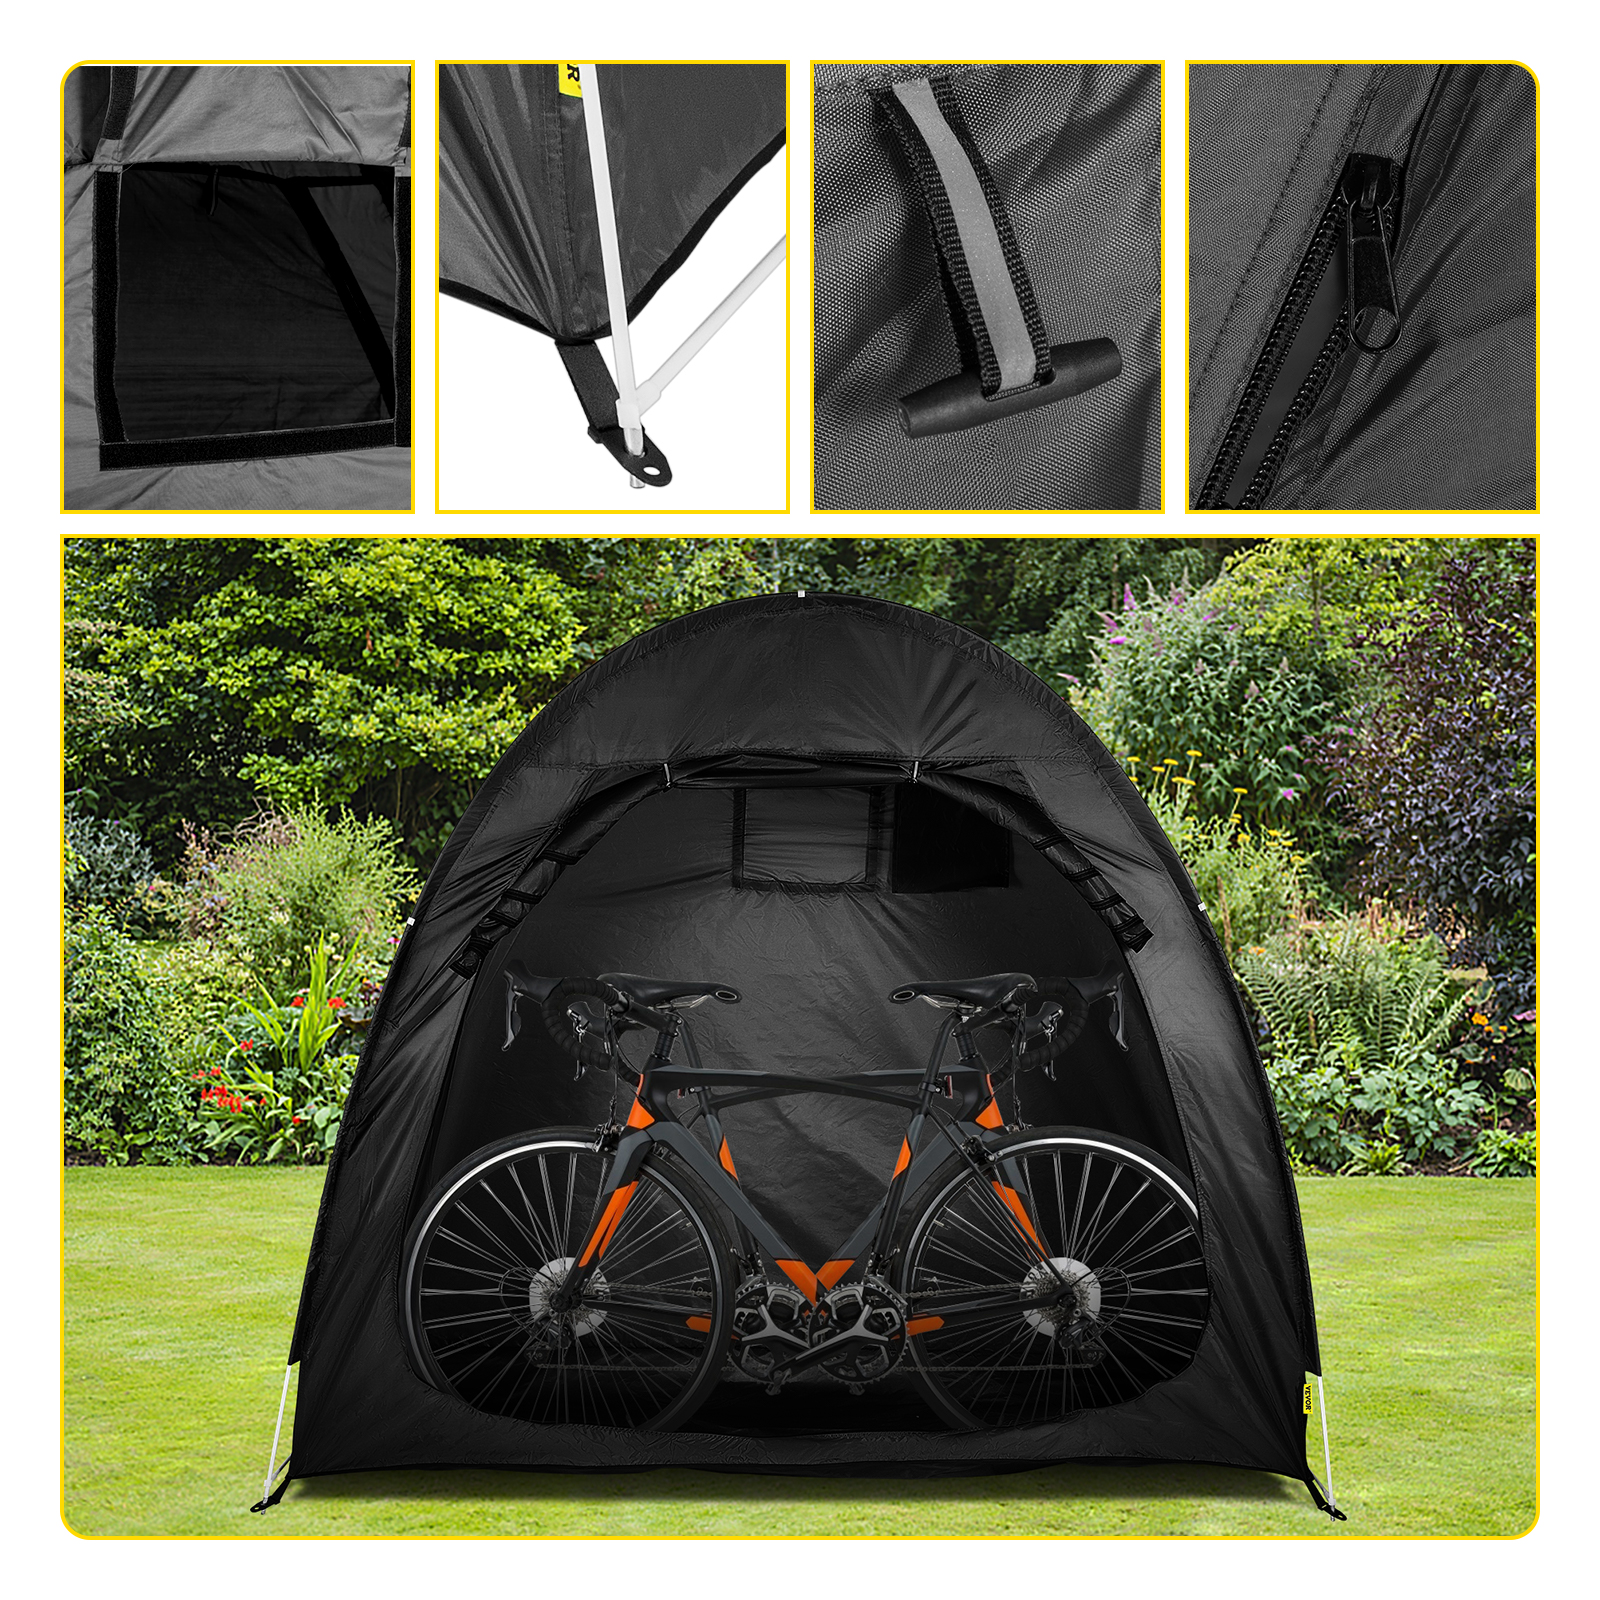 Bike Storage Shed Bicycle Storage Tent Bike Tent Bicycle Storage Shed 210D Oxford Fabric Outdoor Bike Storage Waterproof Cover Bike Tent Bicycle Cover Shelter Black 